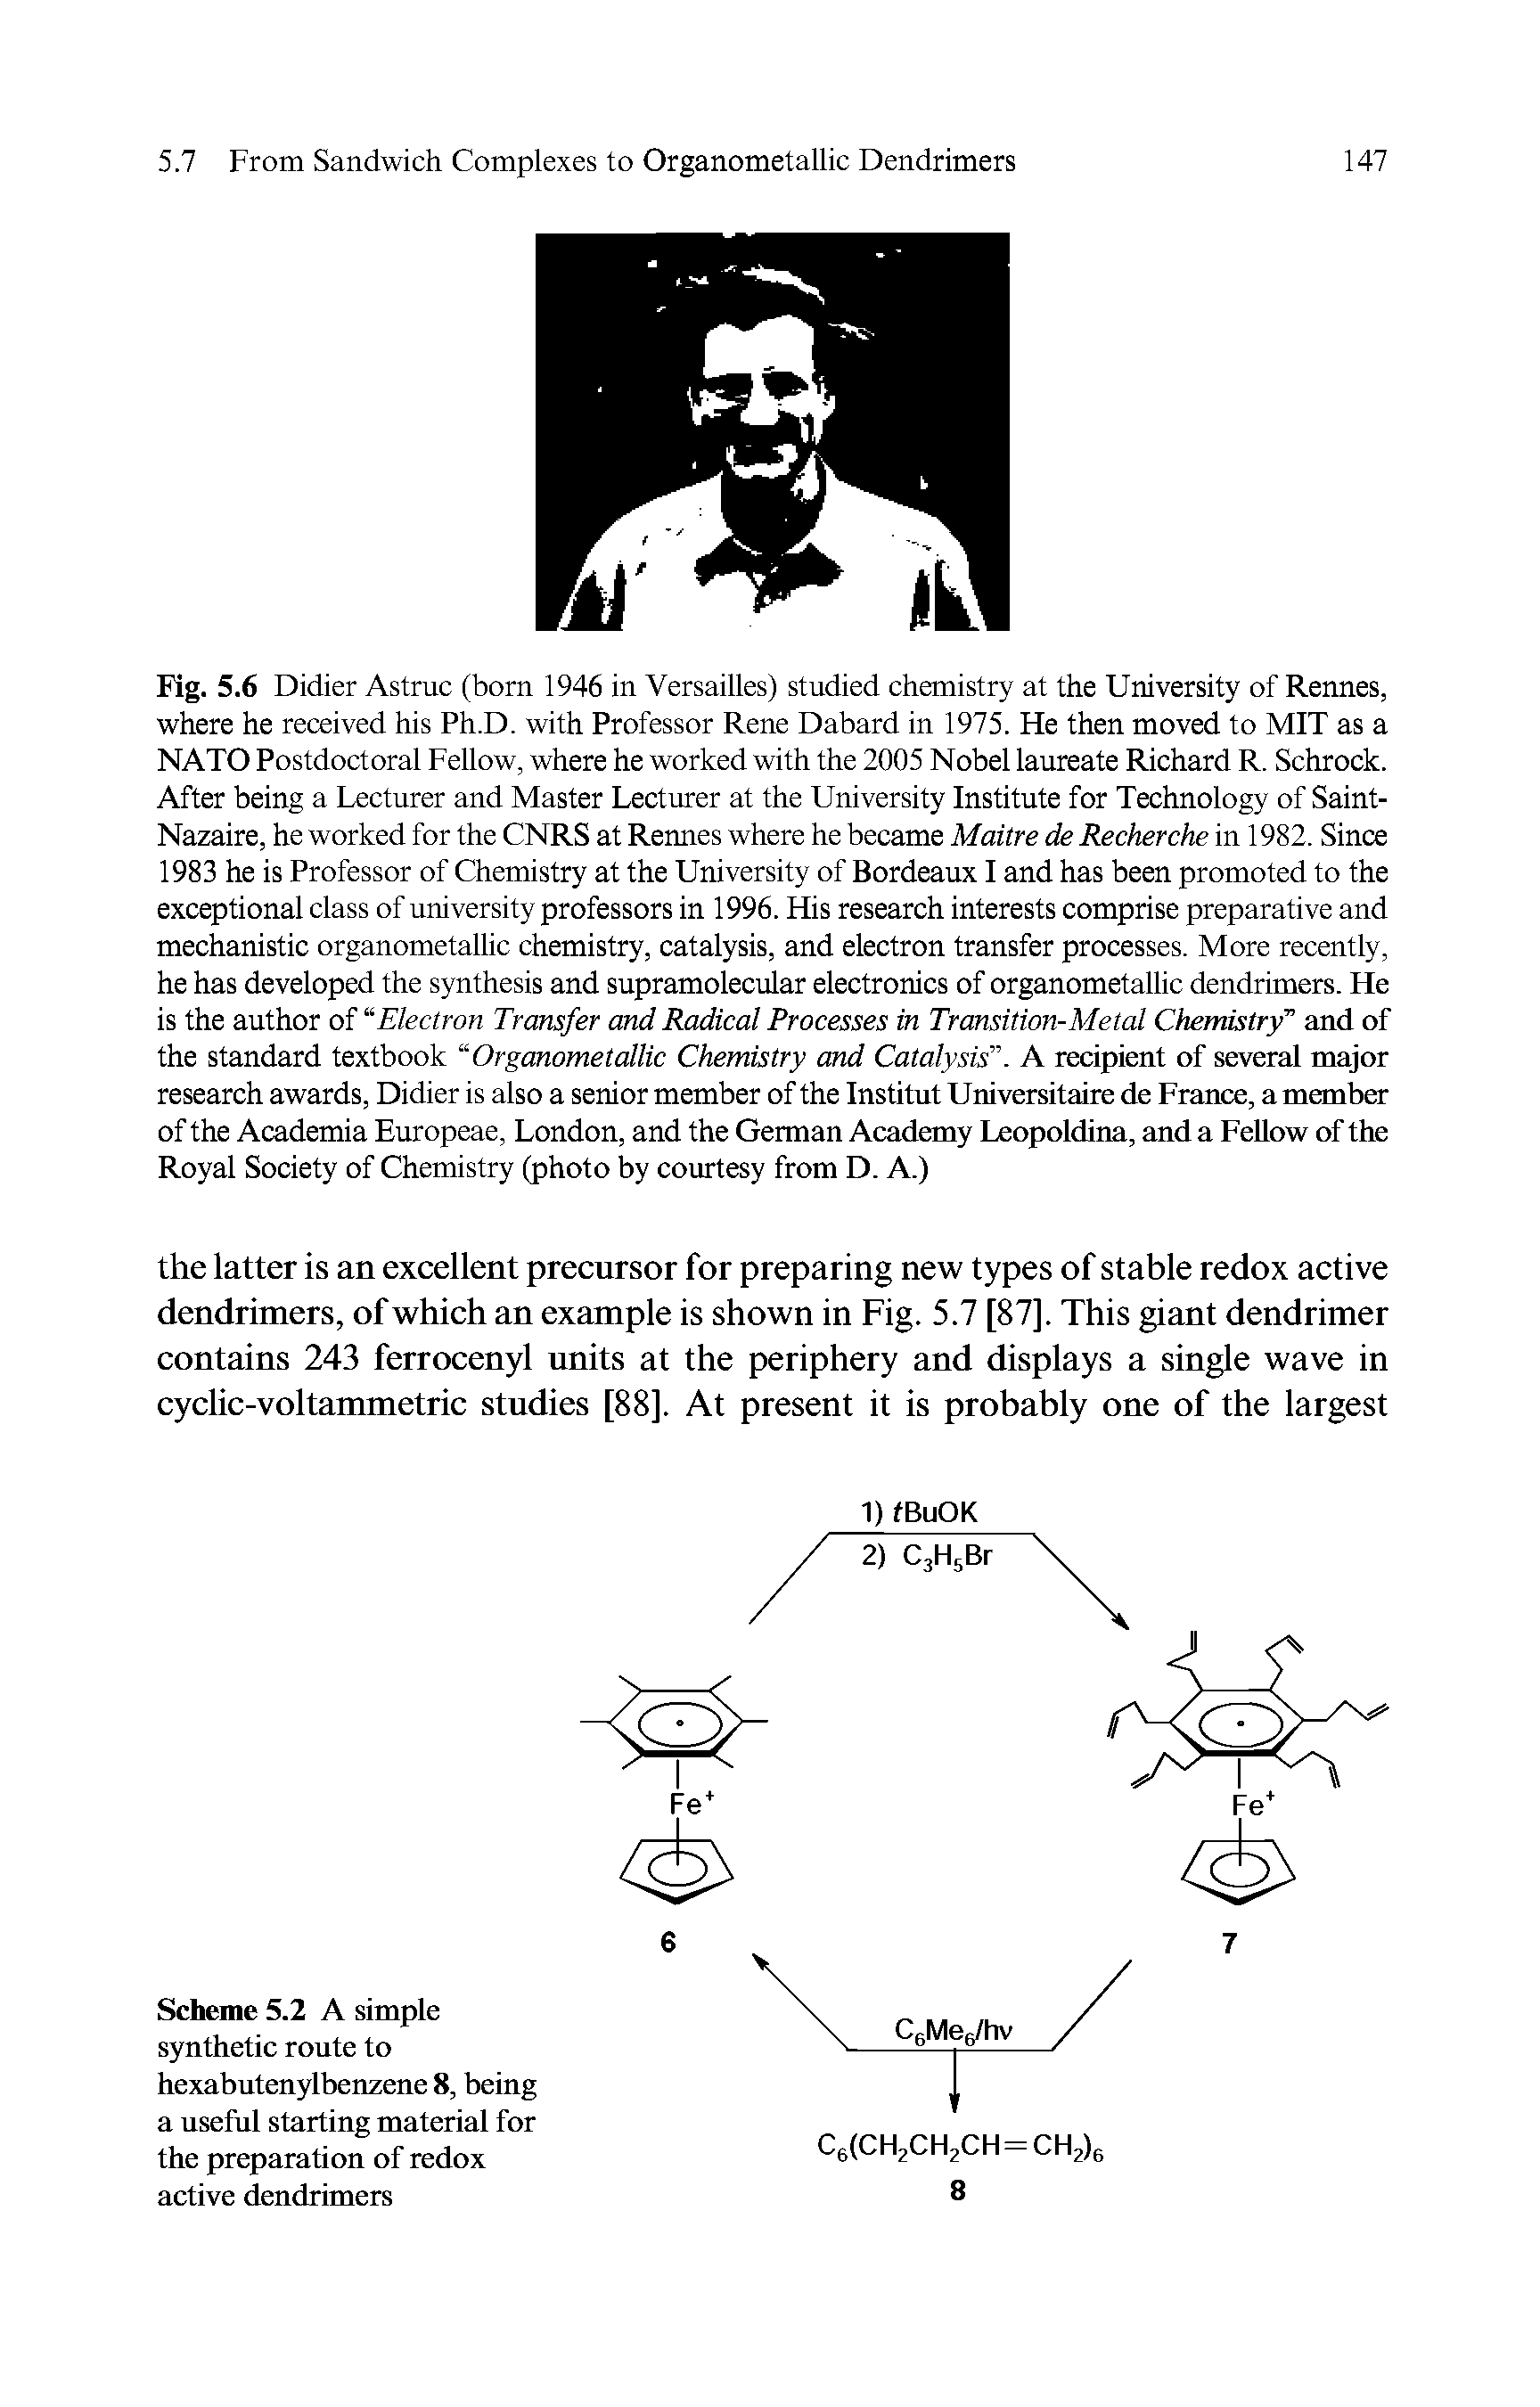 Fig. 5.6 Didier Astruc (bom 1946 in Versailles) studied chemistry at the University of Rennes, where he received his Ph.D. with Professor Rene Dabard in 1975. He then moved to MIT as a NATO Postdoctoral Fellow, where he worked with the 2005 Nobel laureate Richard R. Schrock. After being a Lecturer and Master Lecturer at the University Institute for Technology of Saint-Nazaire, he worked for the CNRS at Rennes where he became Maitre de Recherche in 1982. Since 1983 he is Professor of Chemistry at the University of Bordeaux I and has been promoted to the exceptional class of university professors in 1996. His research interests comprise preparative and mechanistic organometallic chemistry, catalysis, and electron transfer processes. More recently, he has developed the synthesis and supramolecular electronics of organometallic dendrimers. He is the author of Electron Transfer and Radical Processes in Transition-Metal Chemistry and of the standard textbook Organometallic Chemistry and Catalysis . A recipient of several major research awards, Didier is also a senior member of the Institut Universitaire de France, a member of the Academia Europeae, London, and the German Academy Leopoldina, and a Fellow of the Royal Society of Chemistry (photo by courtesy from D. A.)...